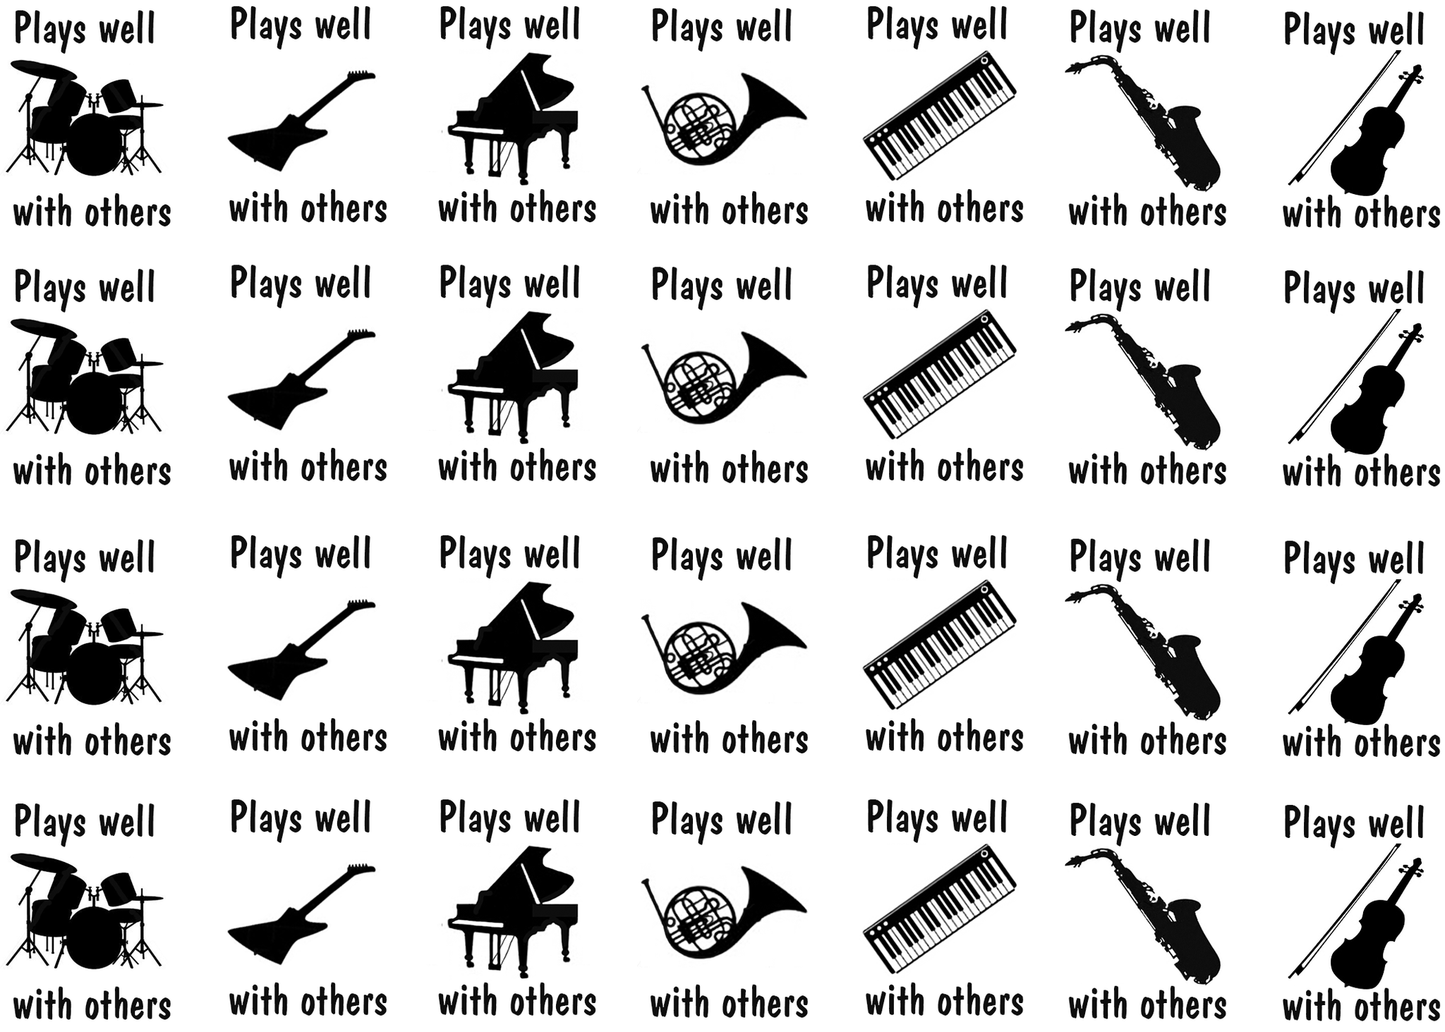 Plays well with others 28 pcs 1-1/16" Black Fused Glass Decals